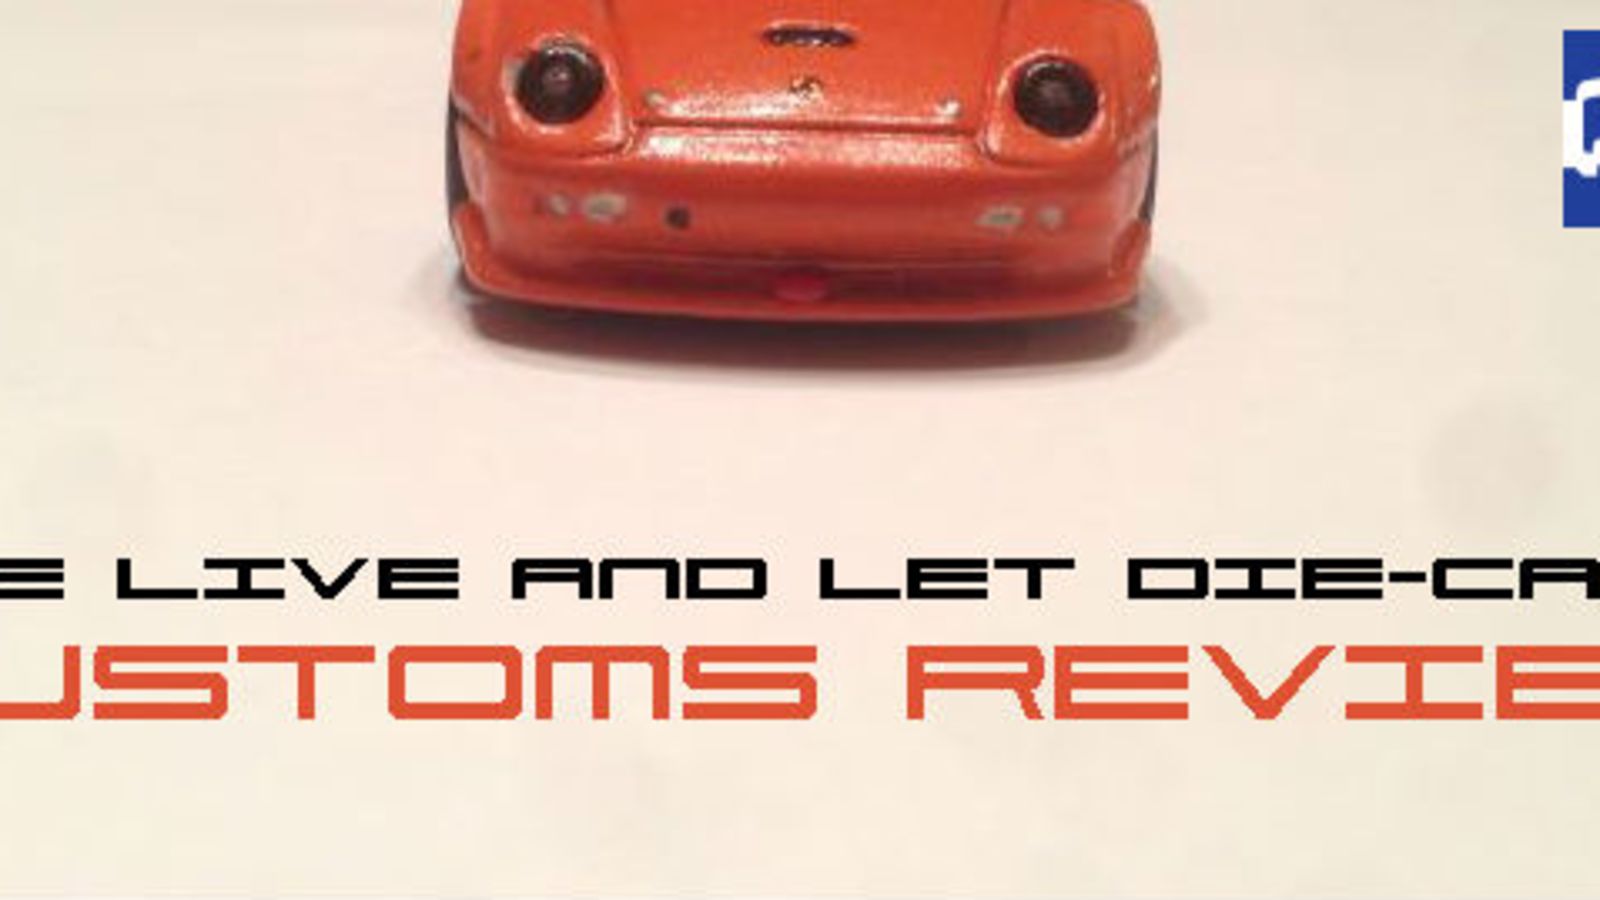 Illustration for article titled The LaLDie-Cast Customs Review - 7/15 - 7/21/2014